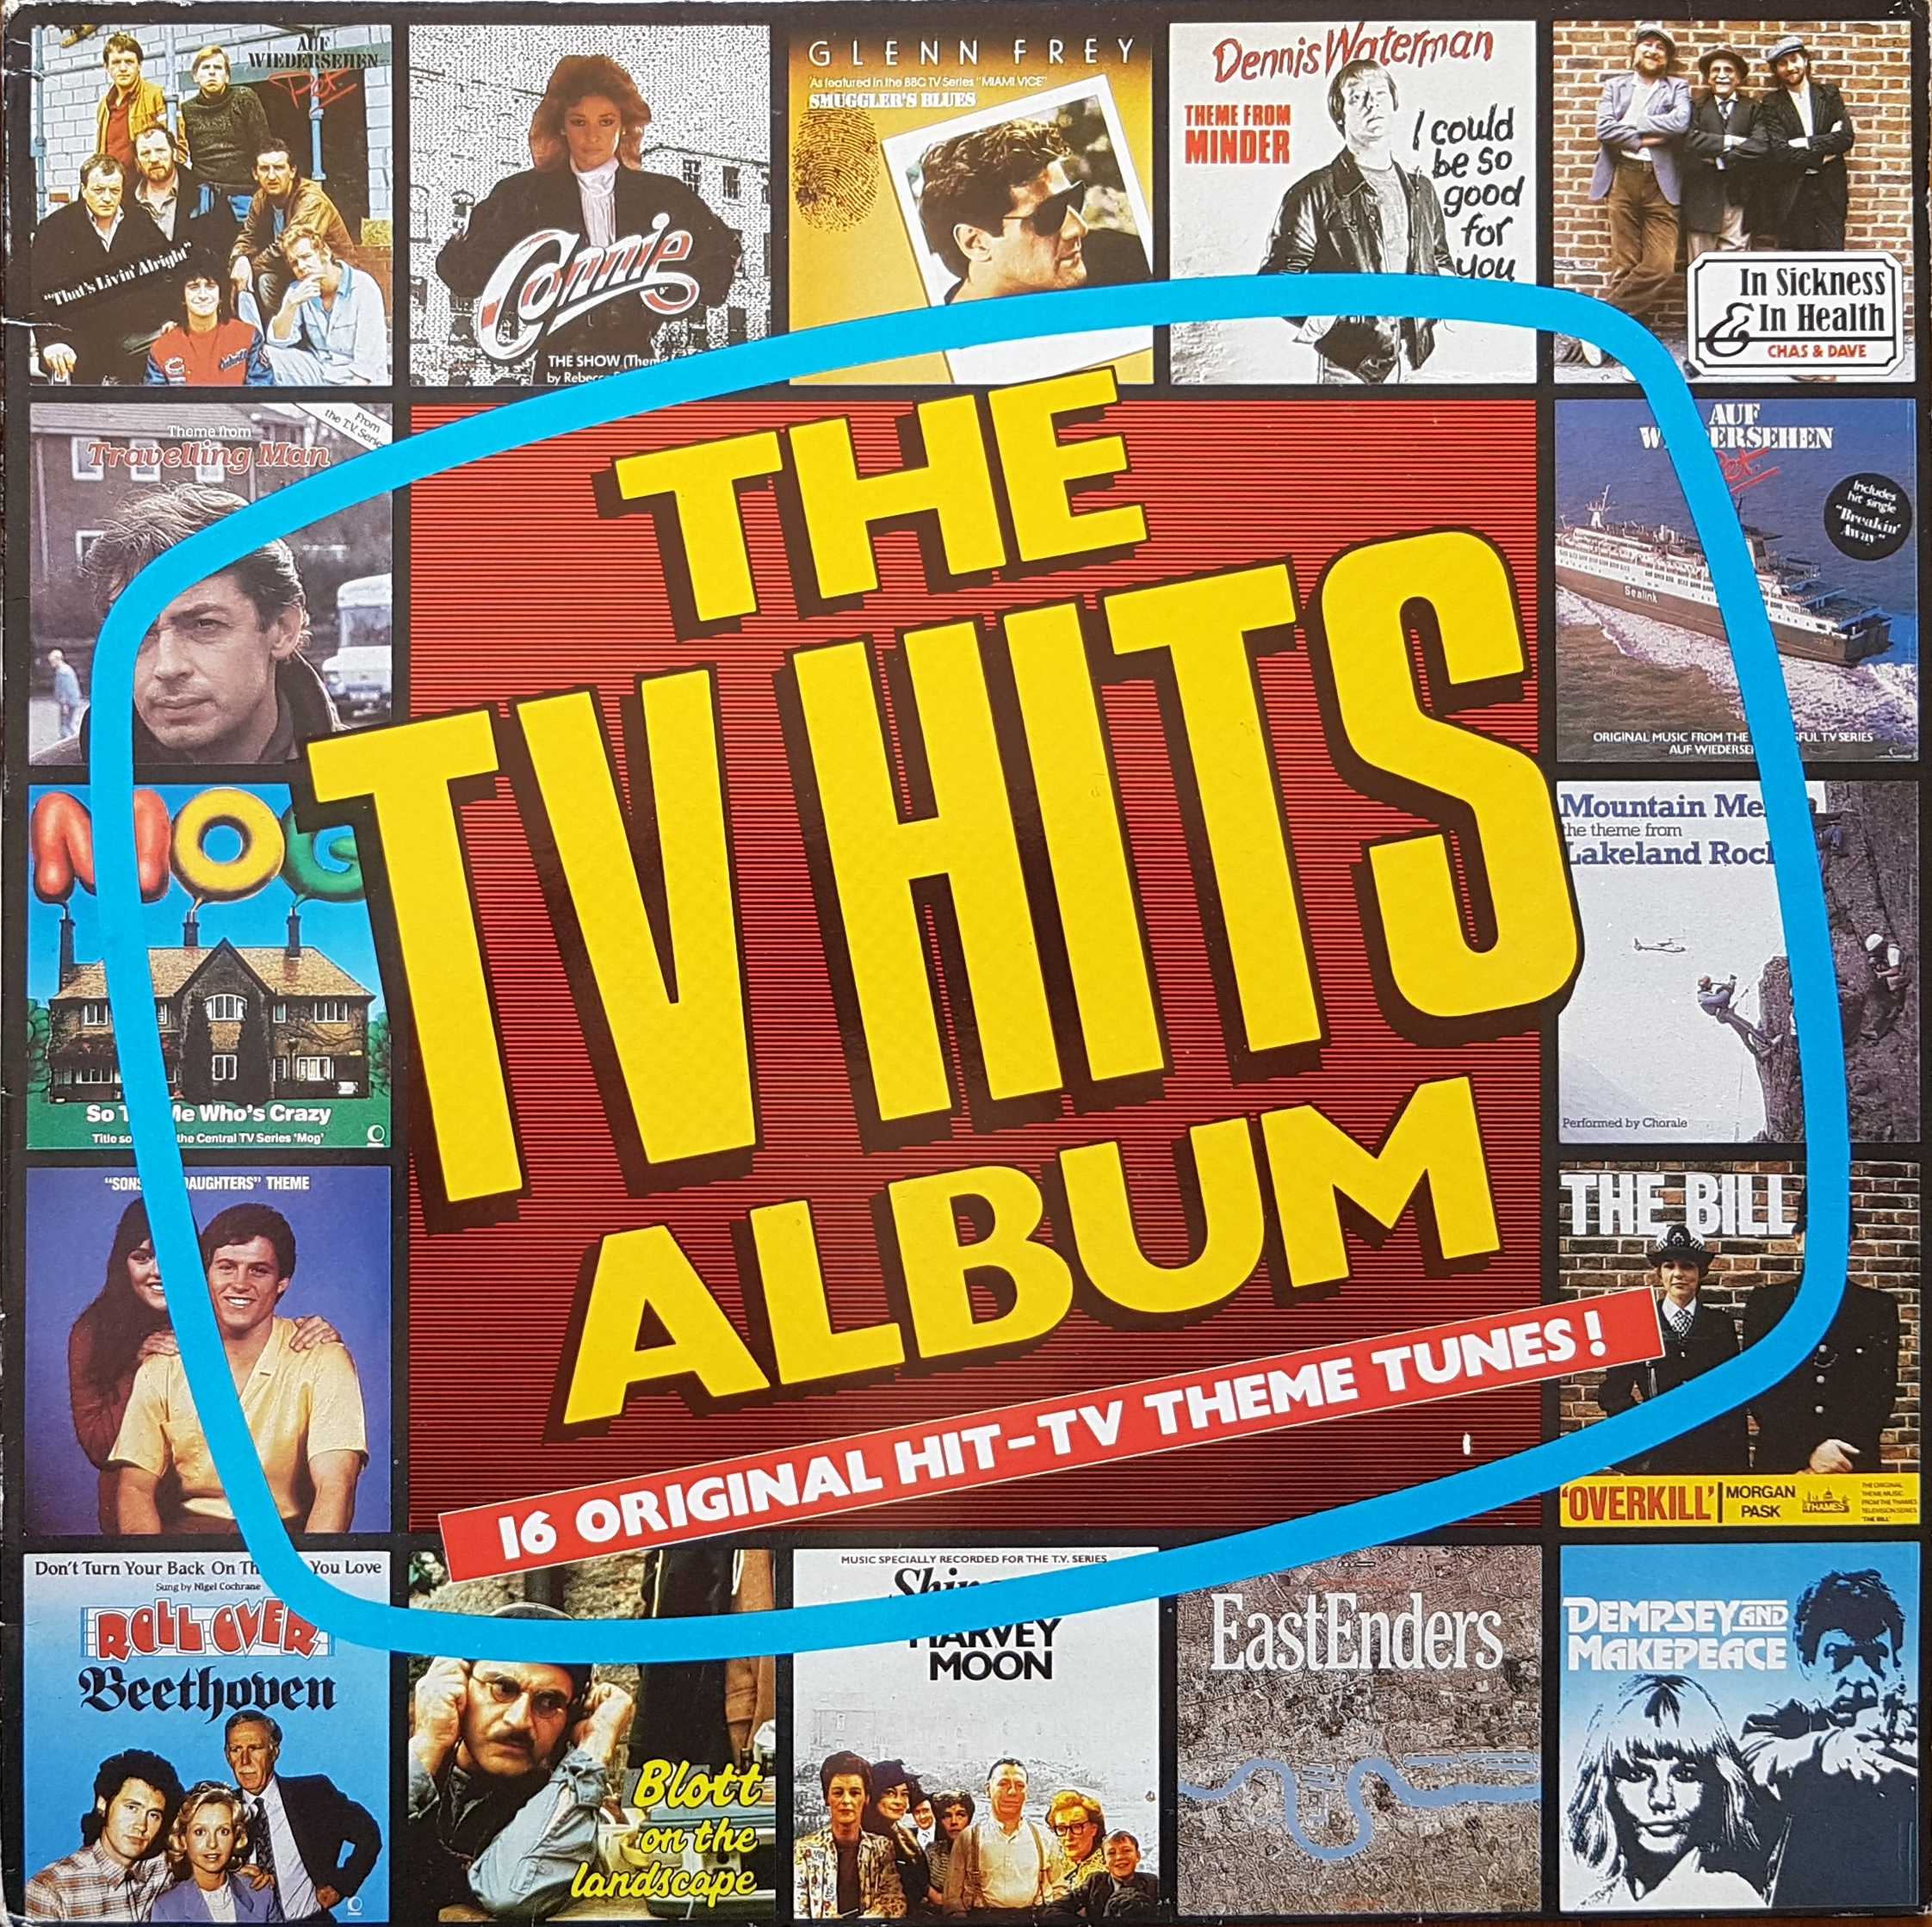 Picture of TVLP 3 The TV hits album by artist Various from ITV, Channel 4 and Channel 5 library